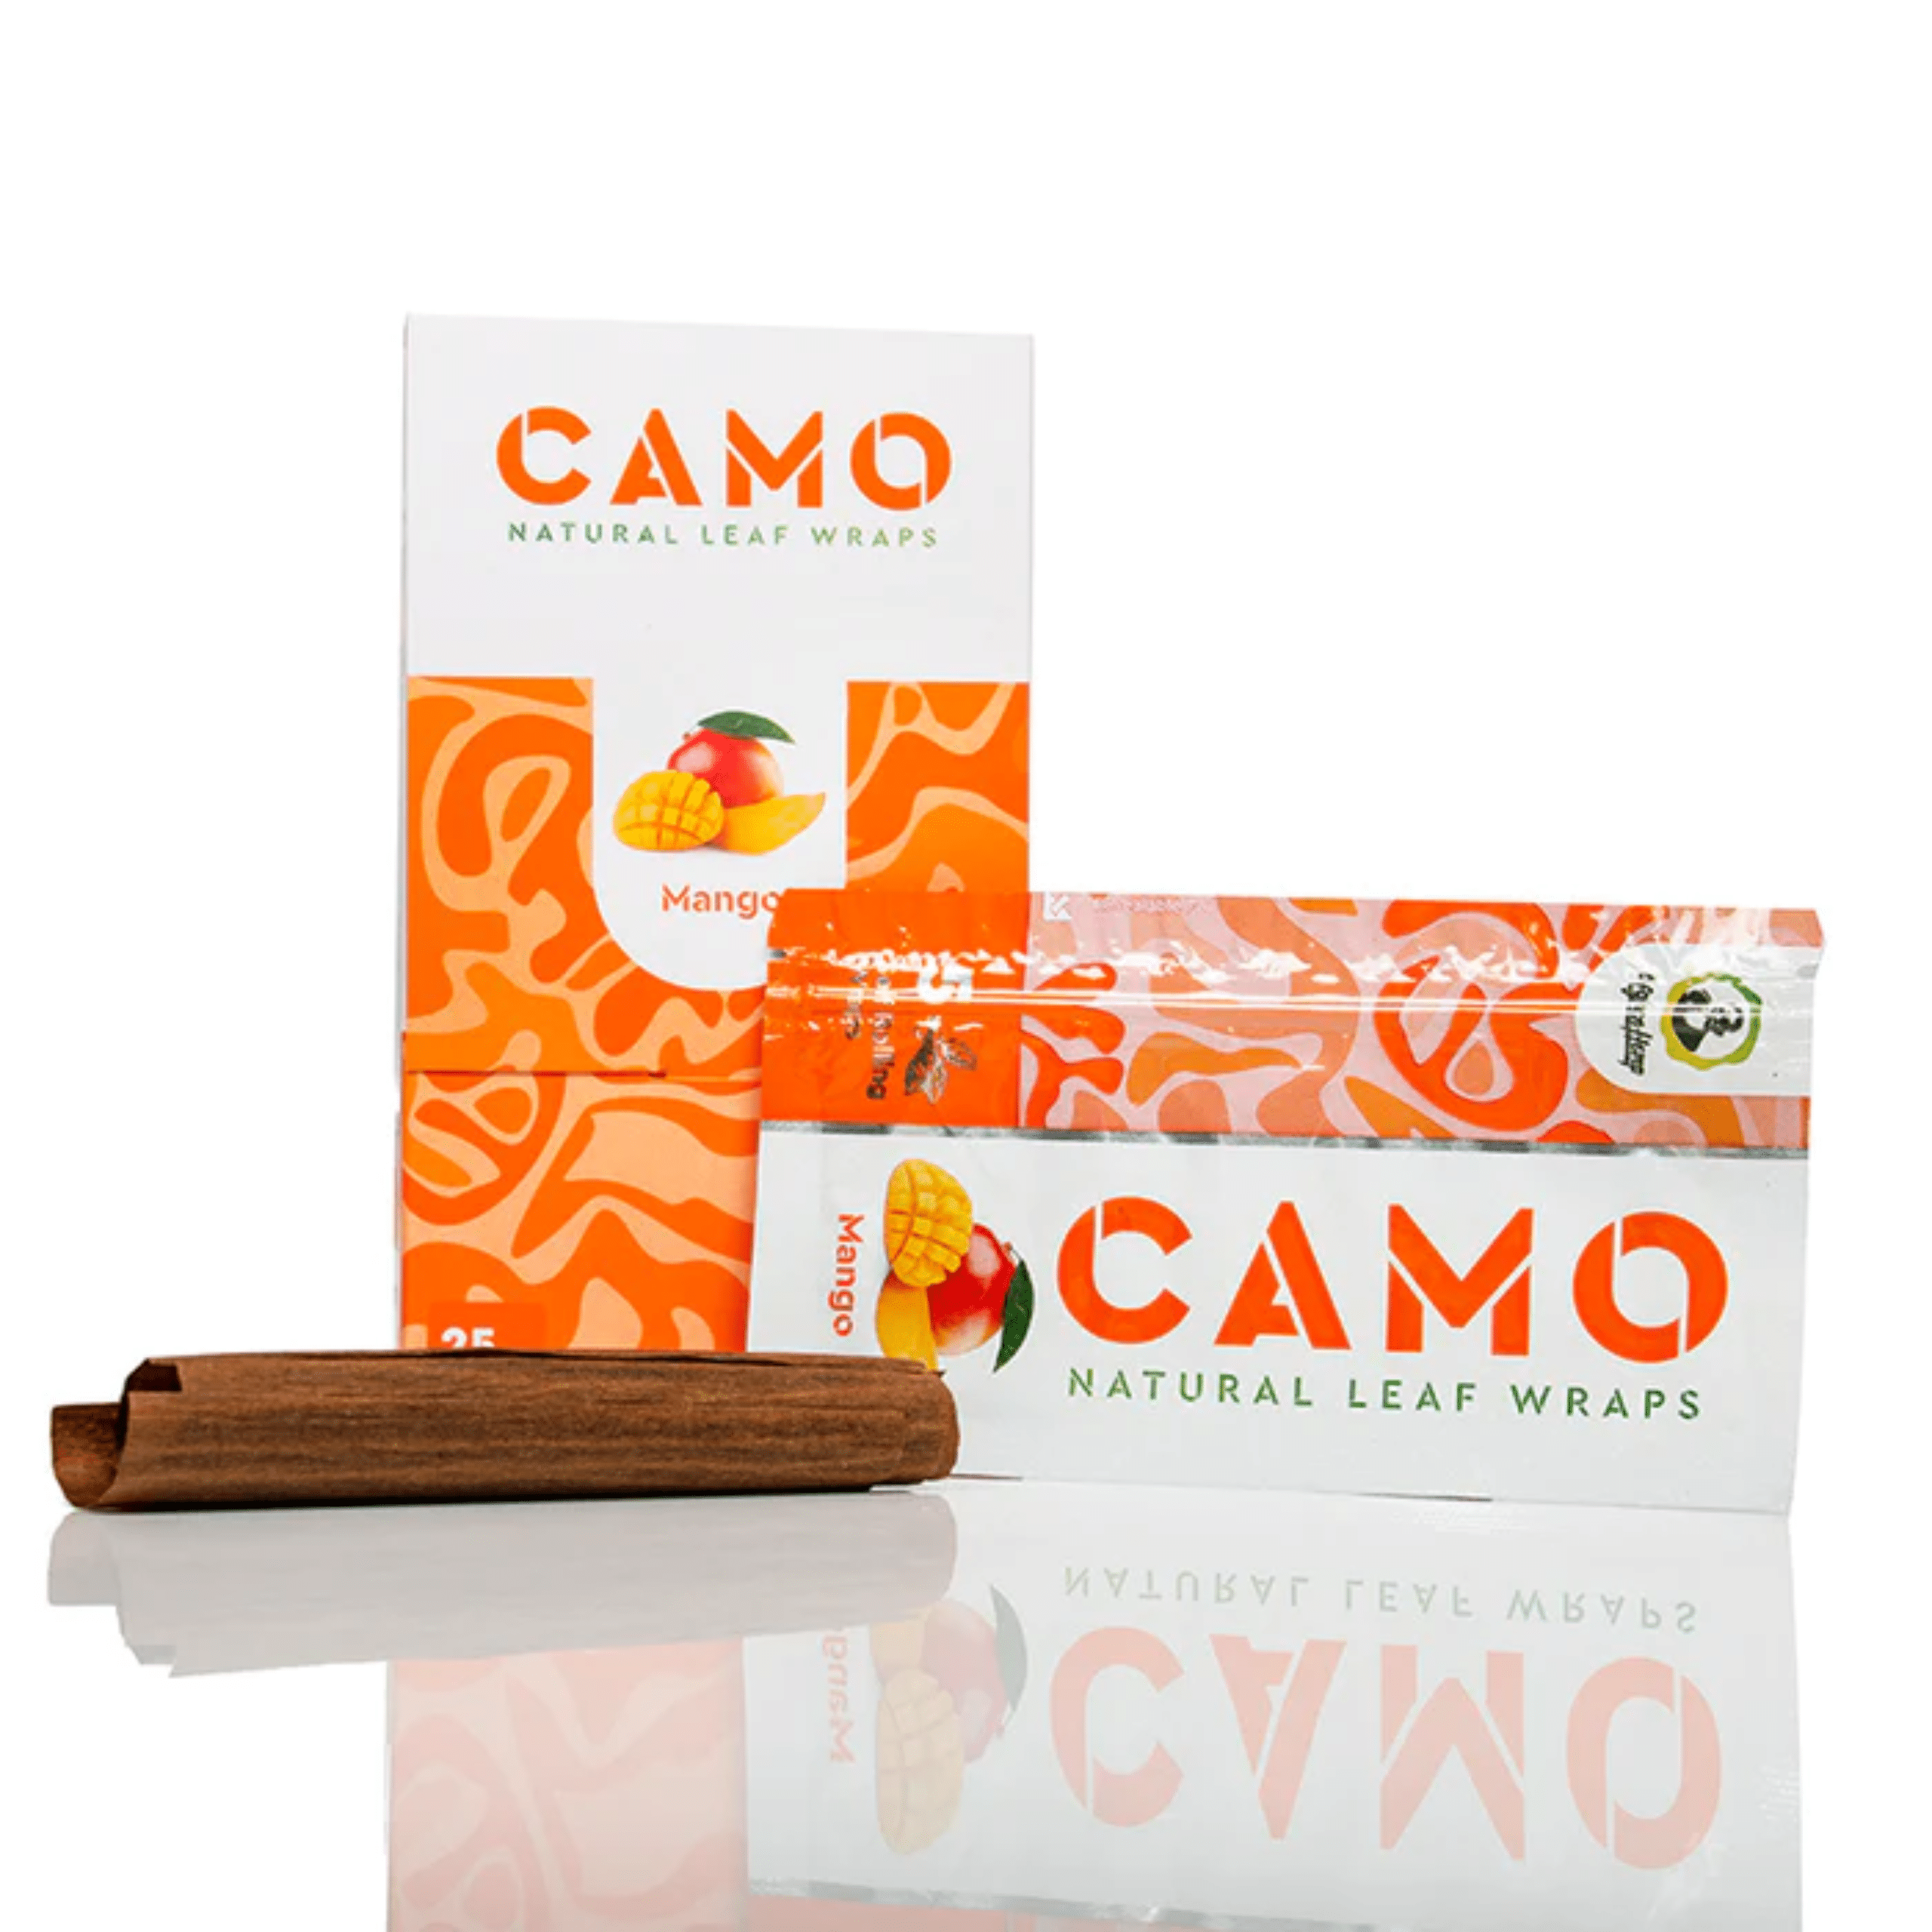 Packaging and leaf wraps from Camo in mango flavor